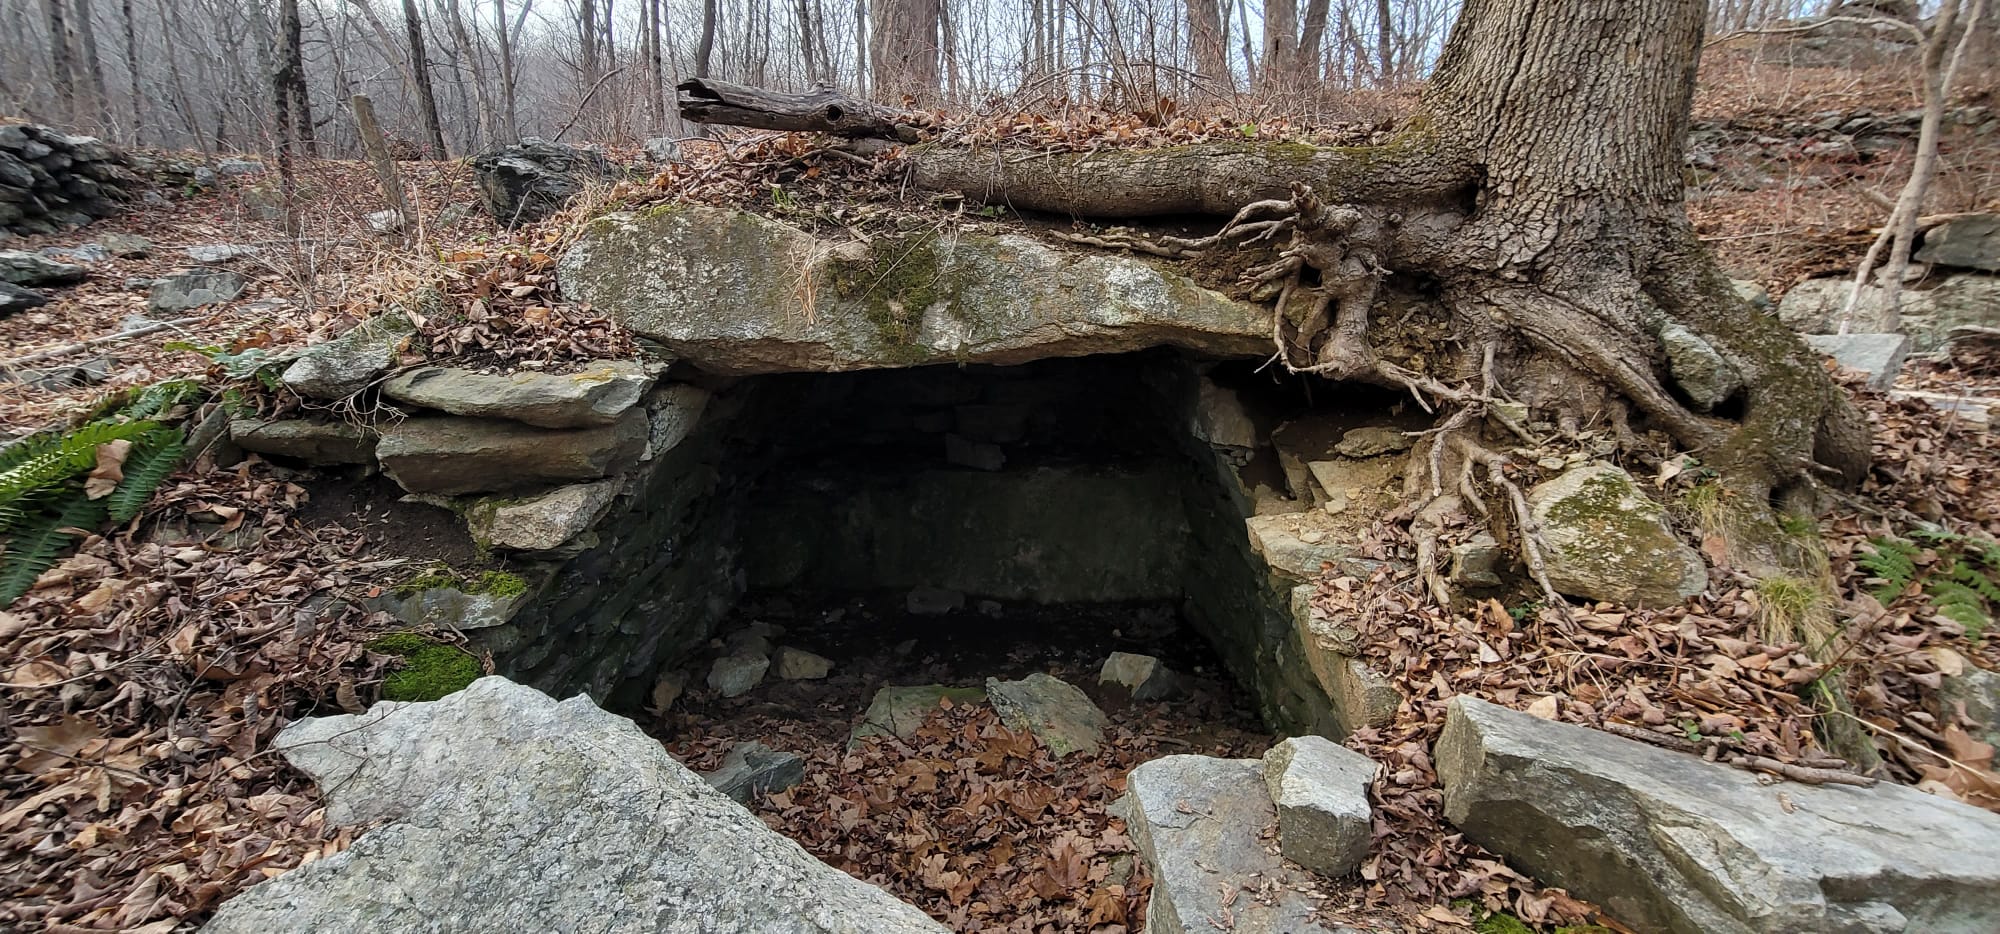 Native+American+Stone+Structures+of+the+Lower+Hudson+Valley+Lecture+and+Hike